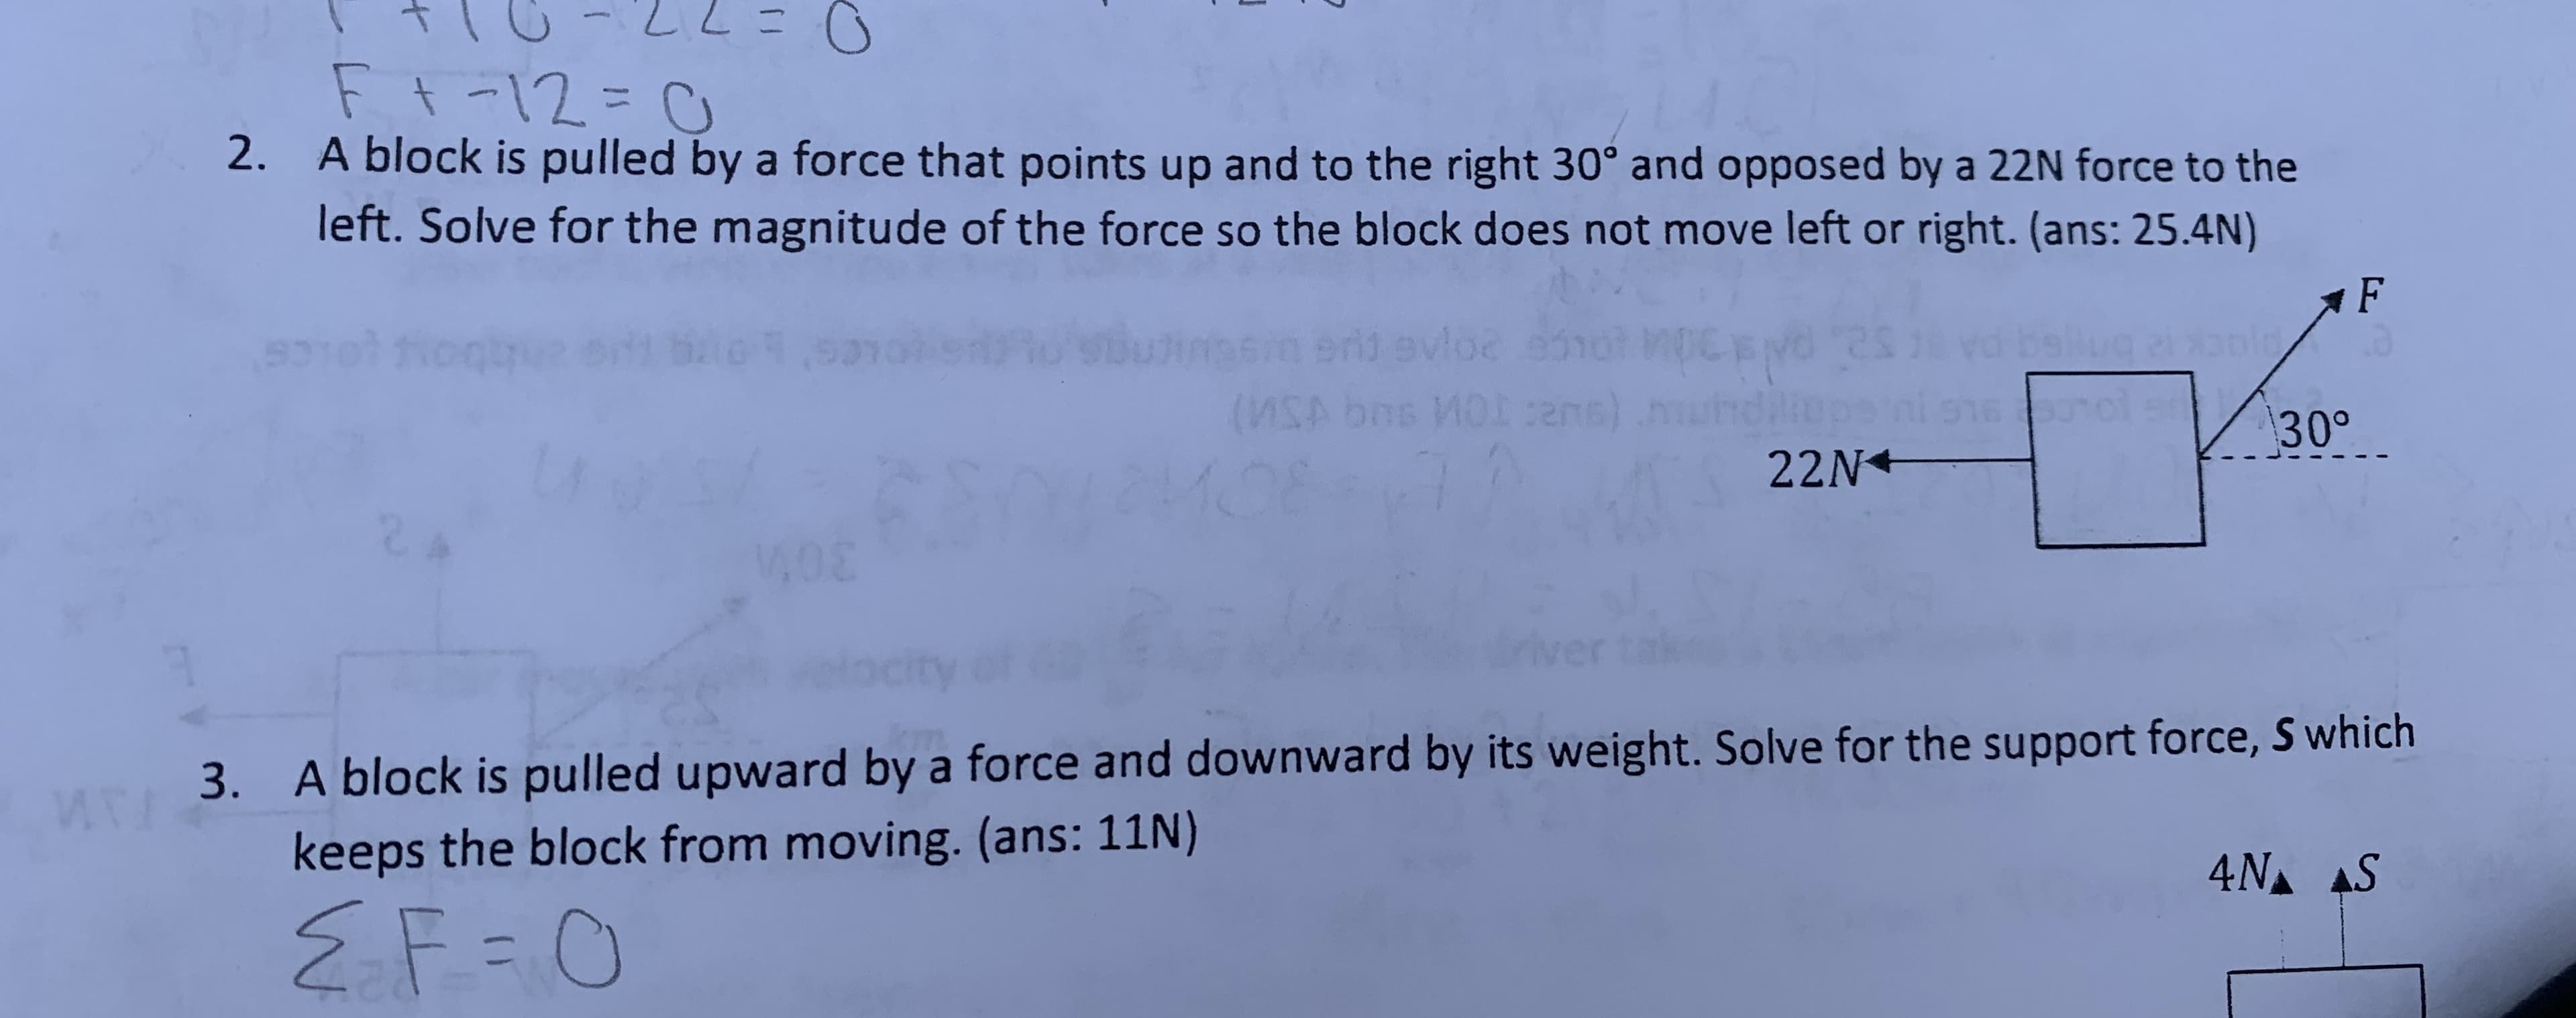 Ft-12=0
A block is pulled by a force that points up and to the right 30° and opposed by a 22N force to the
left. Solve for the magnitude of the force so the block does not move left or right. (ans: 25.4N)
2.
F
e9.9
loe
93
(USA b ns)
130°
22N
(2MOB
M01
A block is pulled upward by a force and downward by its weight. Solve for the support force, S which
keeps the block from moving. (ans: 11N)
3.
4NA S
2F O
